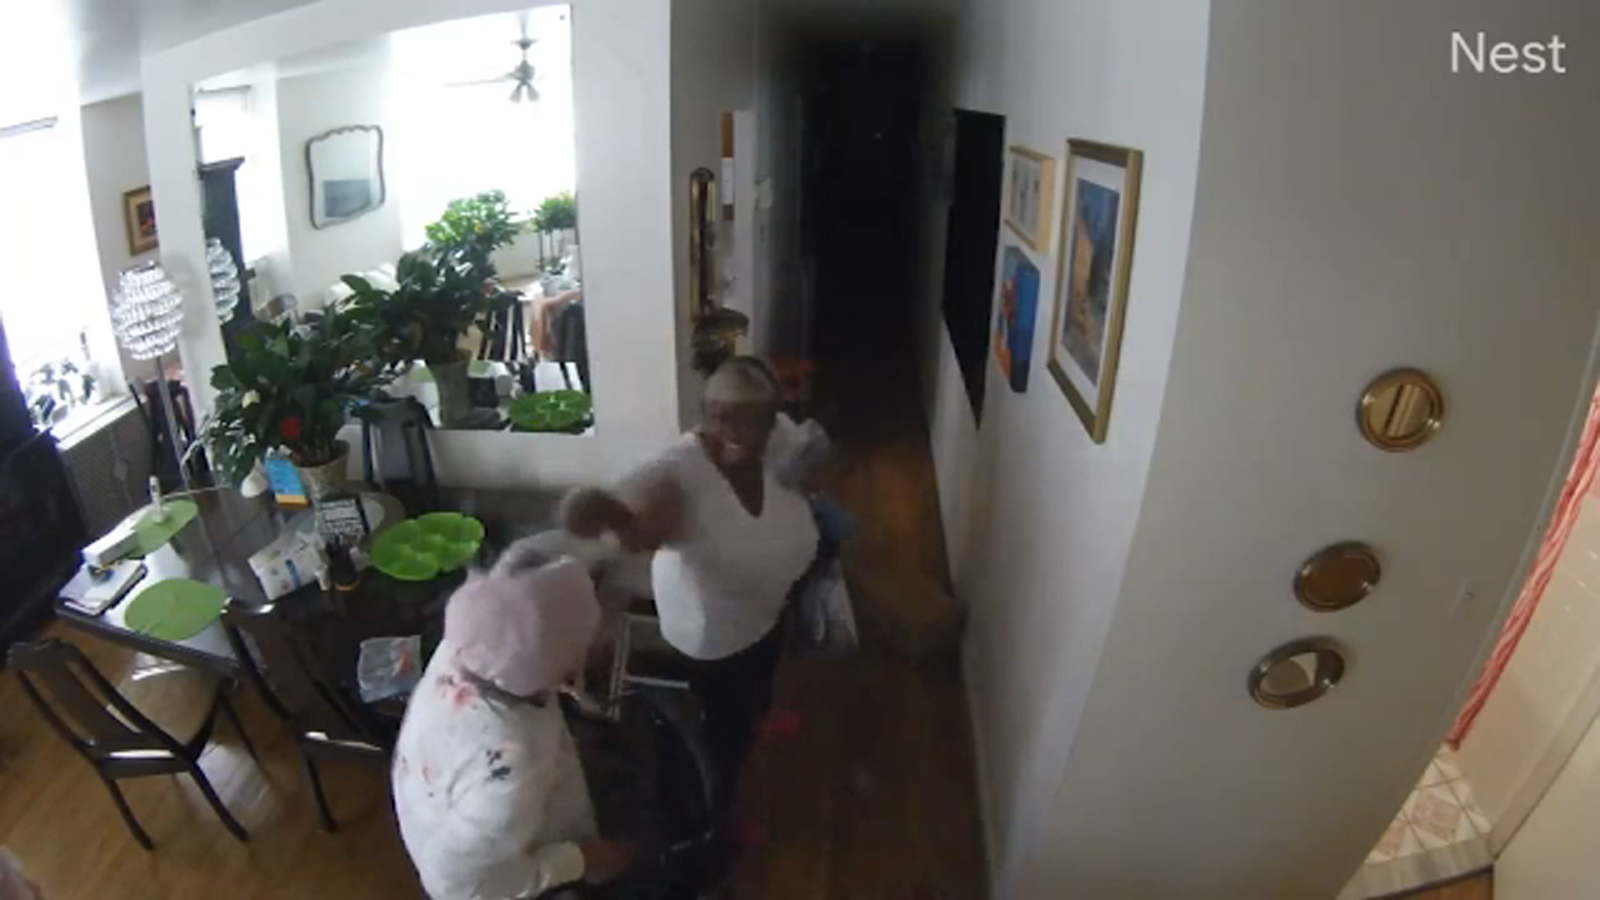 NYC Woman Assault: Video shows 95-year-old grandmother hit several times by home aide in Harlem